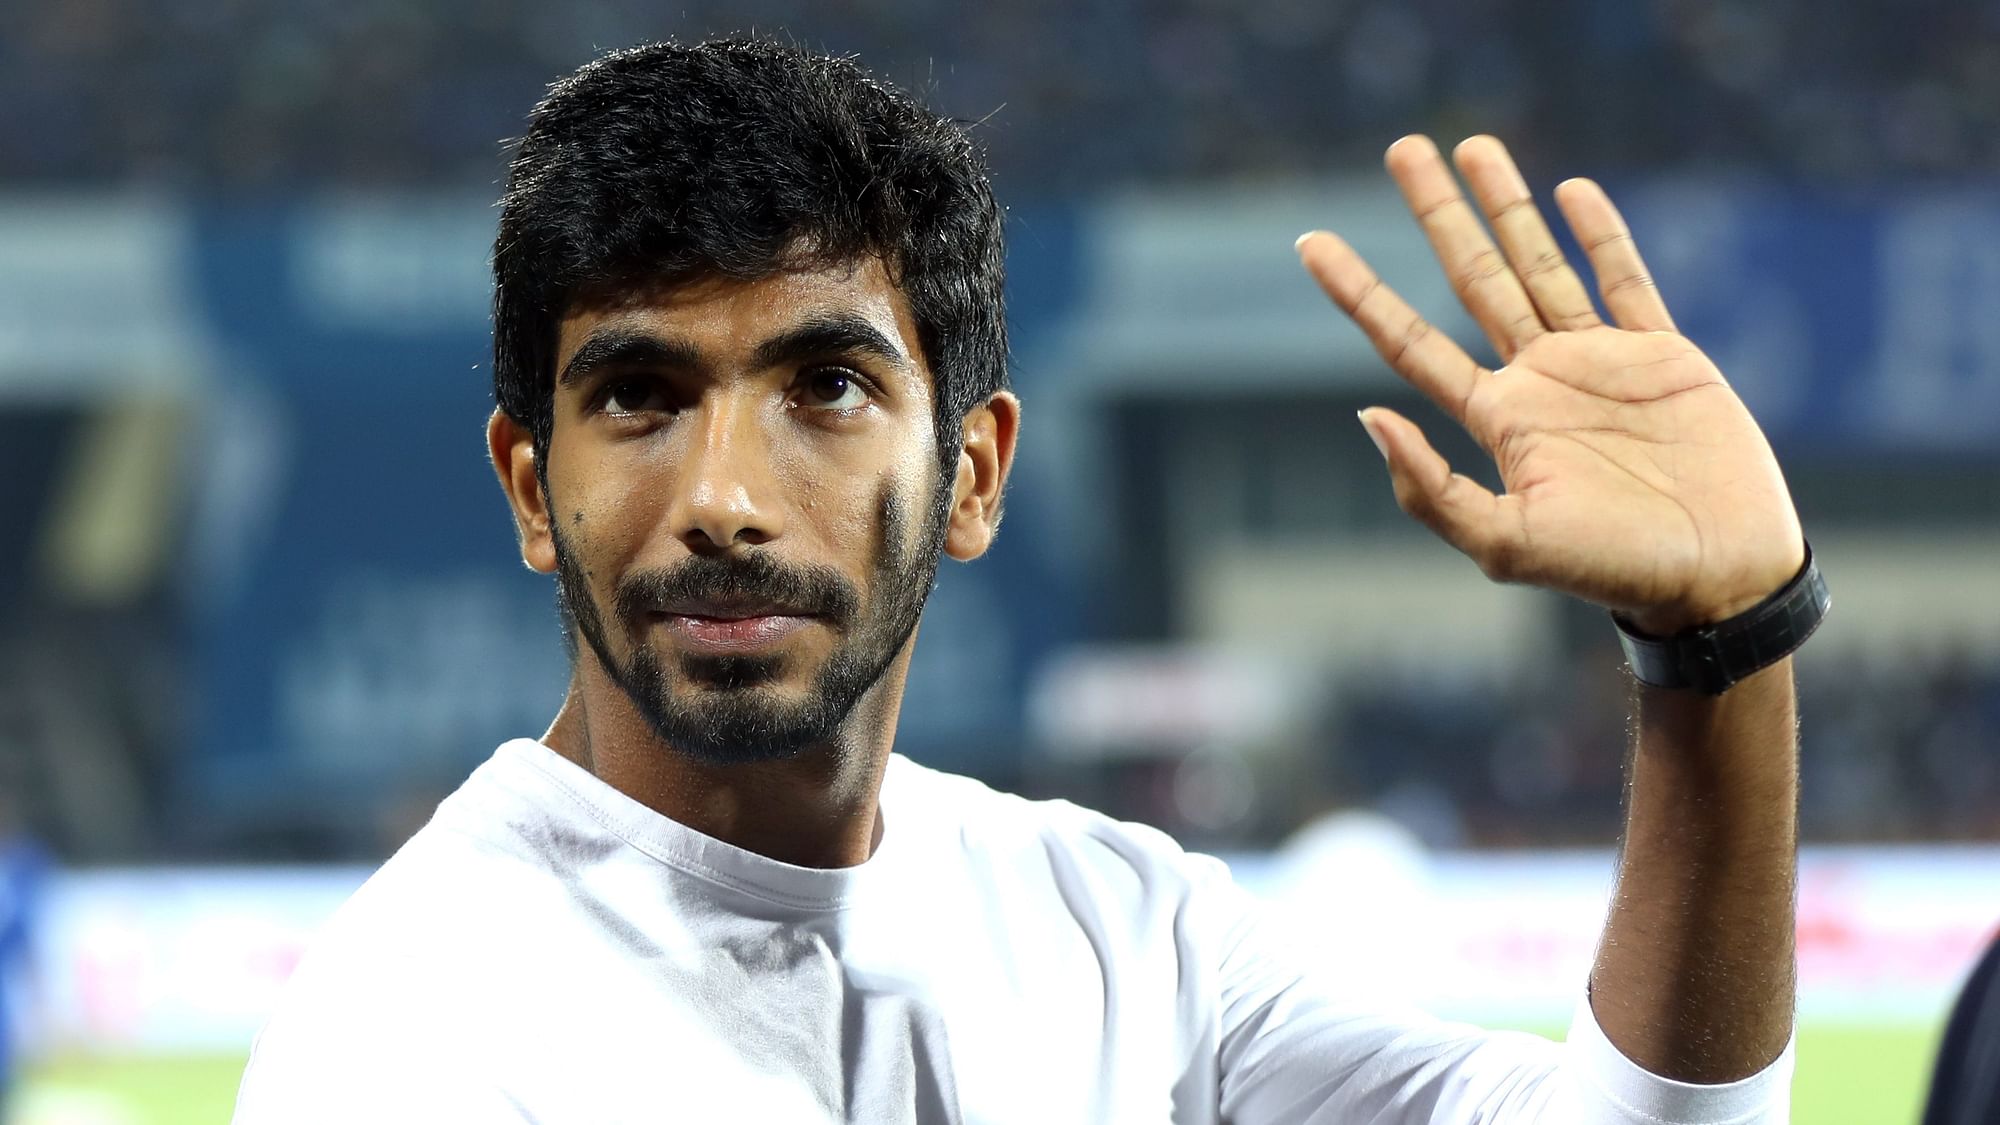 Jasprit Bumrah had also won the Indian Premier League with Mumbai Indians this year.